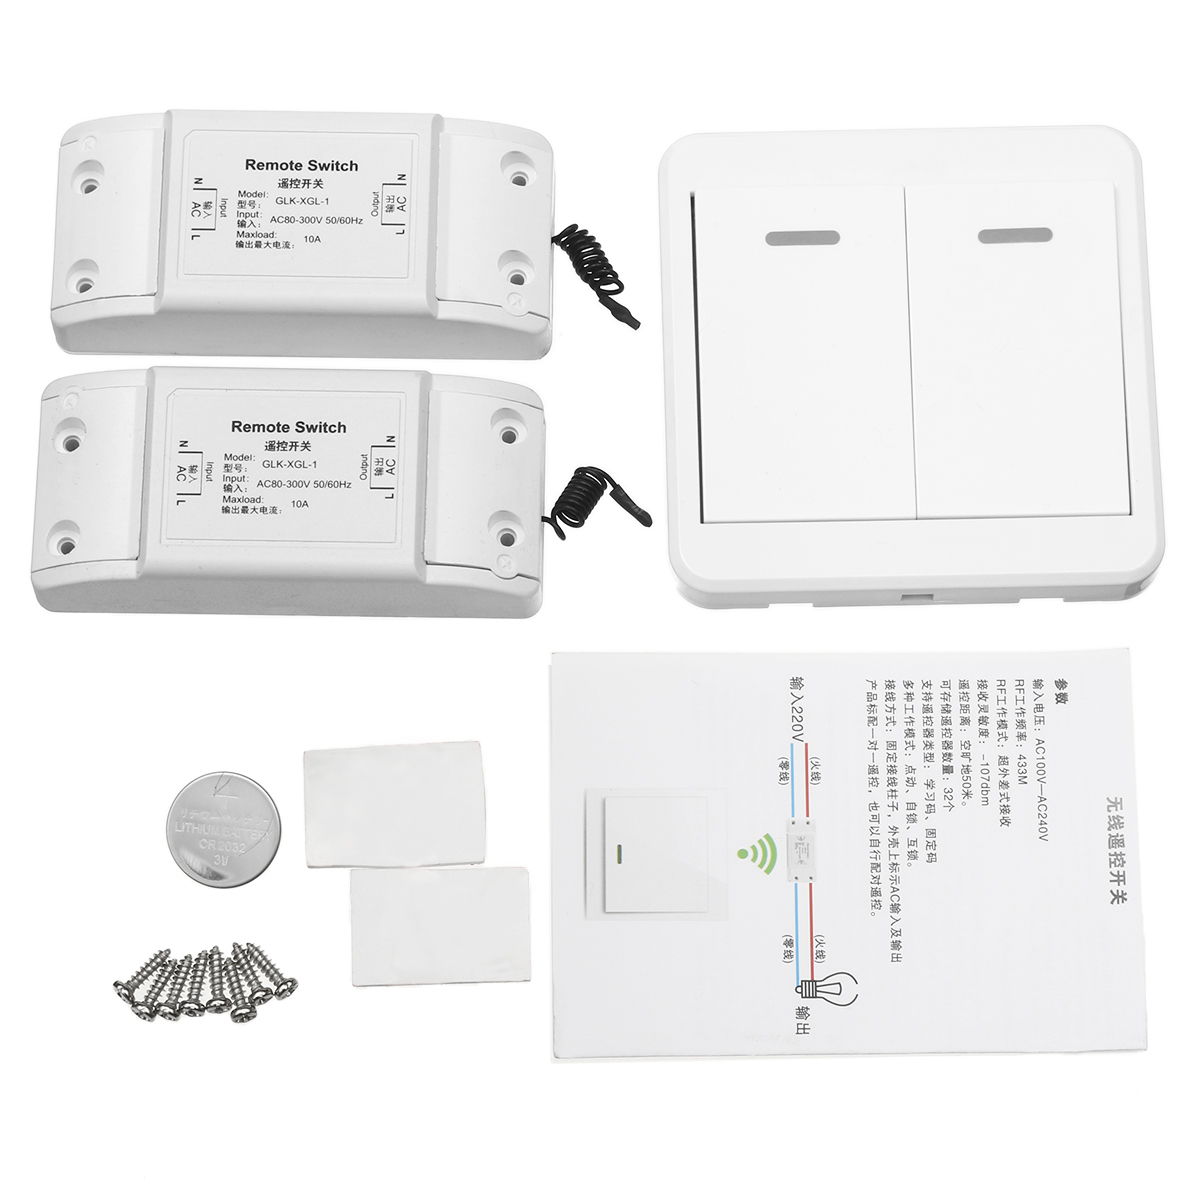 12Way-Lamp-Light-Wireless-Remote-Control-Switch-Receiver-Transmitter-ONOFF-Switch-Controller-1304488-8